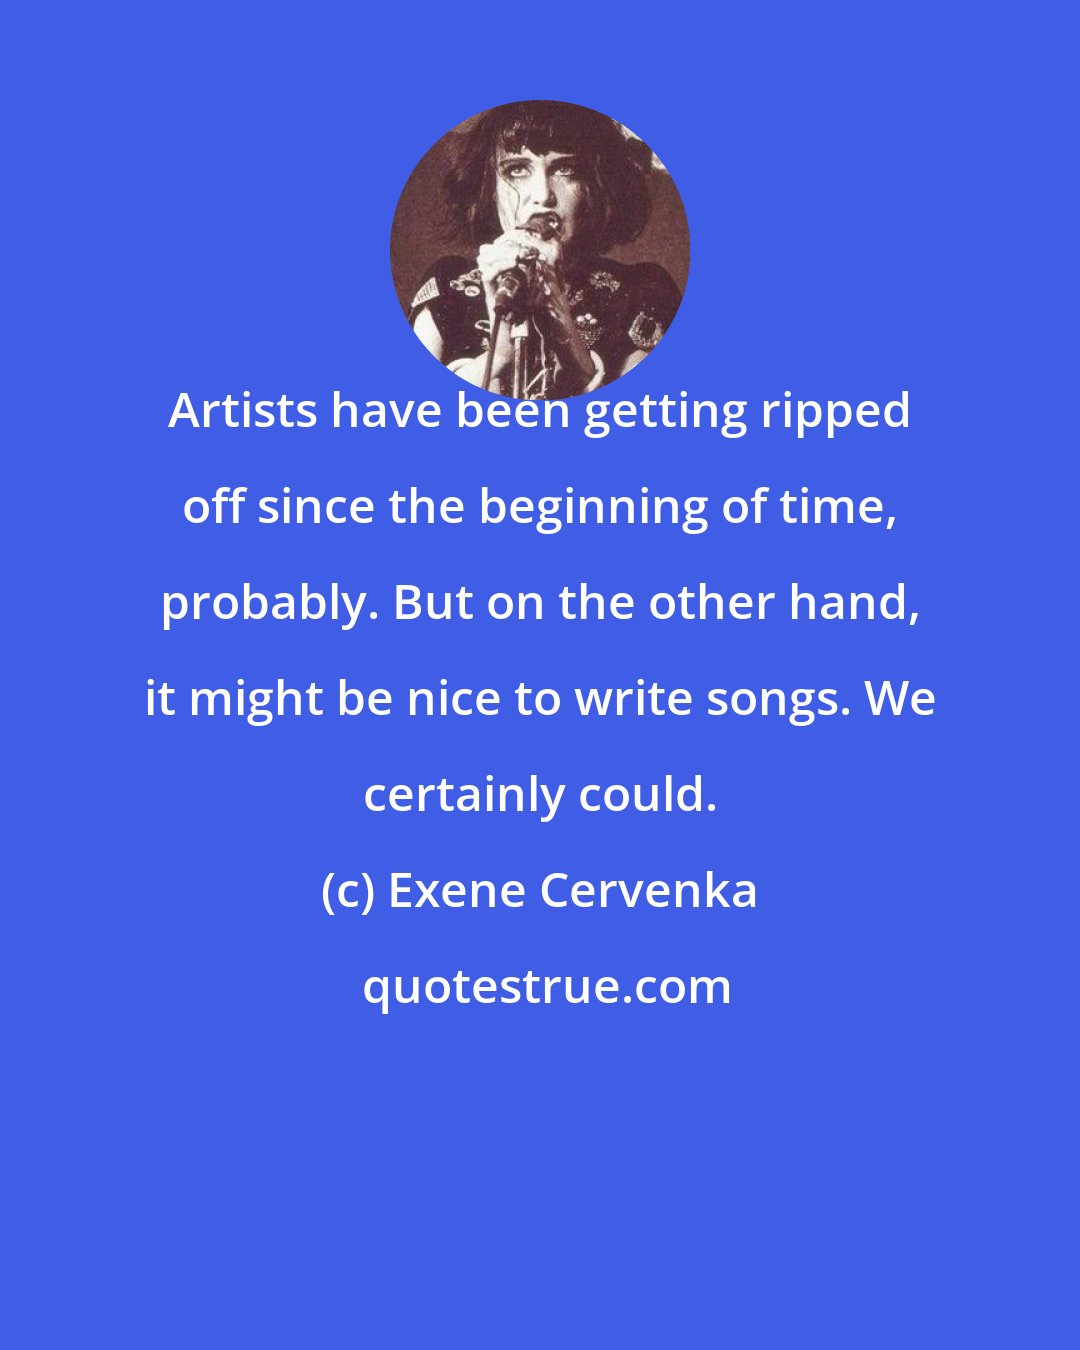 Exene Cervenka: Artists have been getting ripped off since the beginning of time, probably. But on the other hand, it might be nice to write songs. We certainly could.